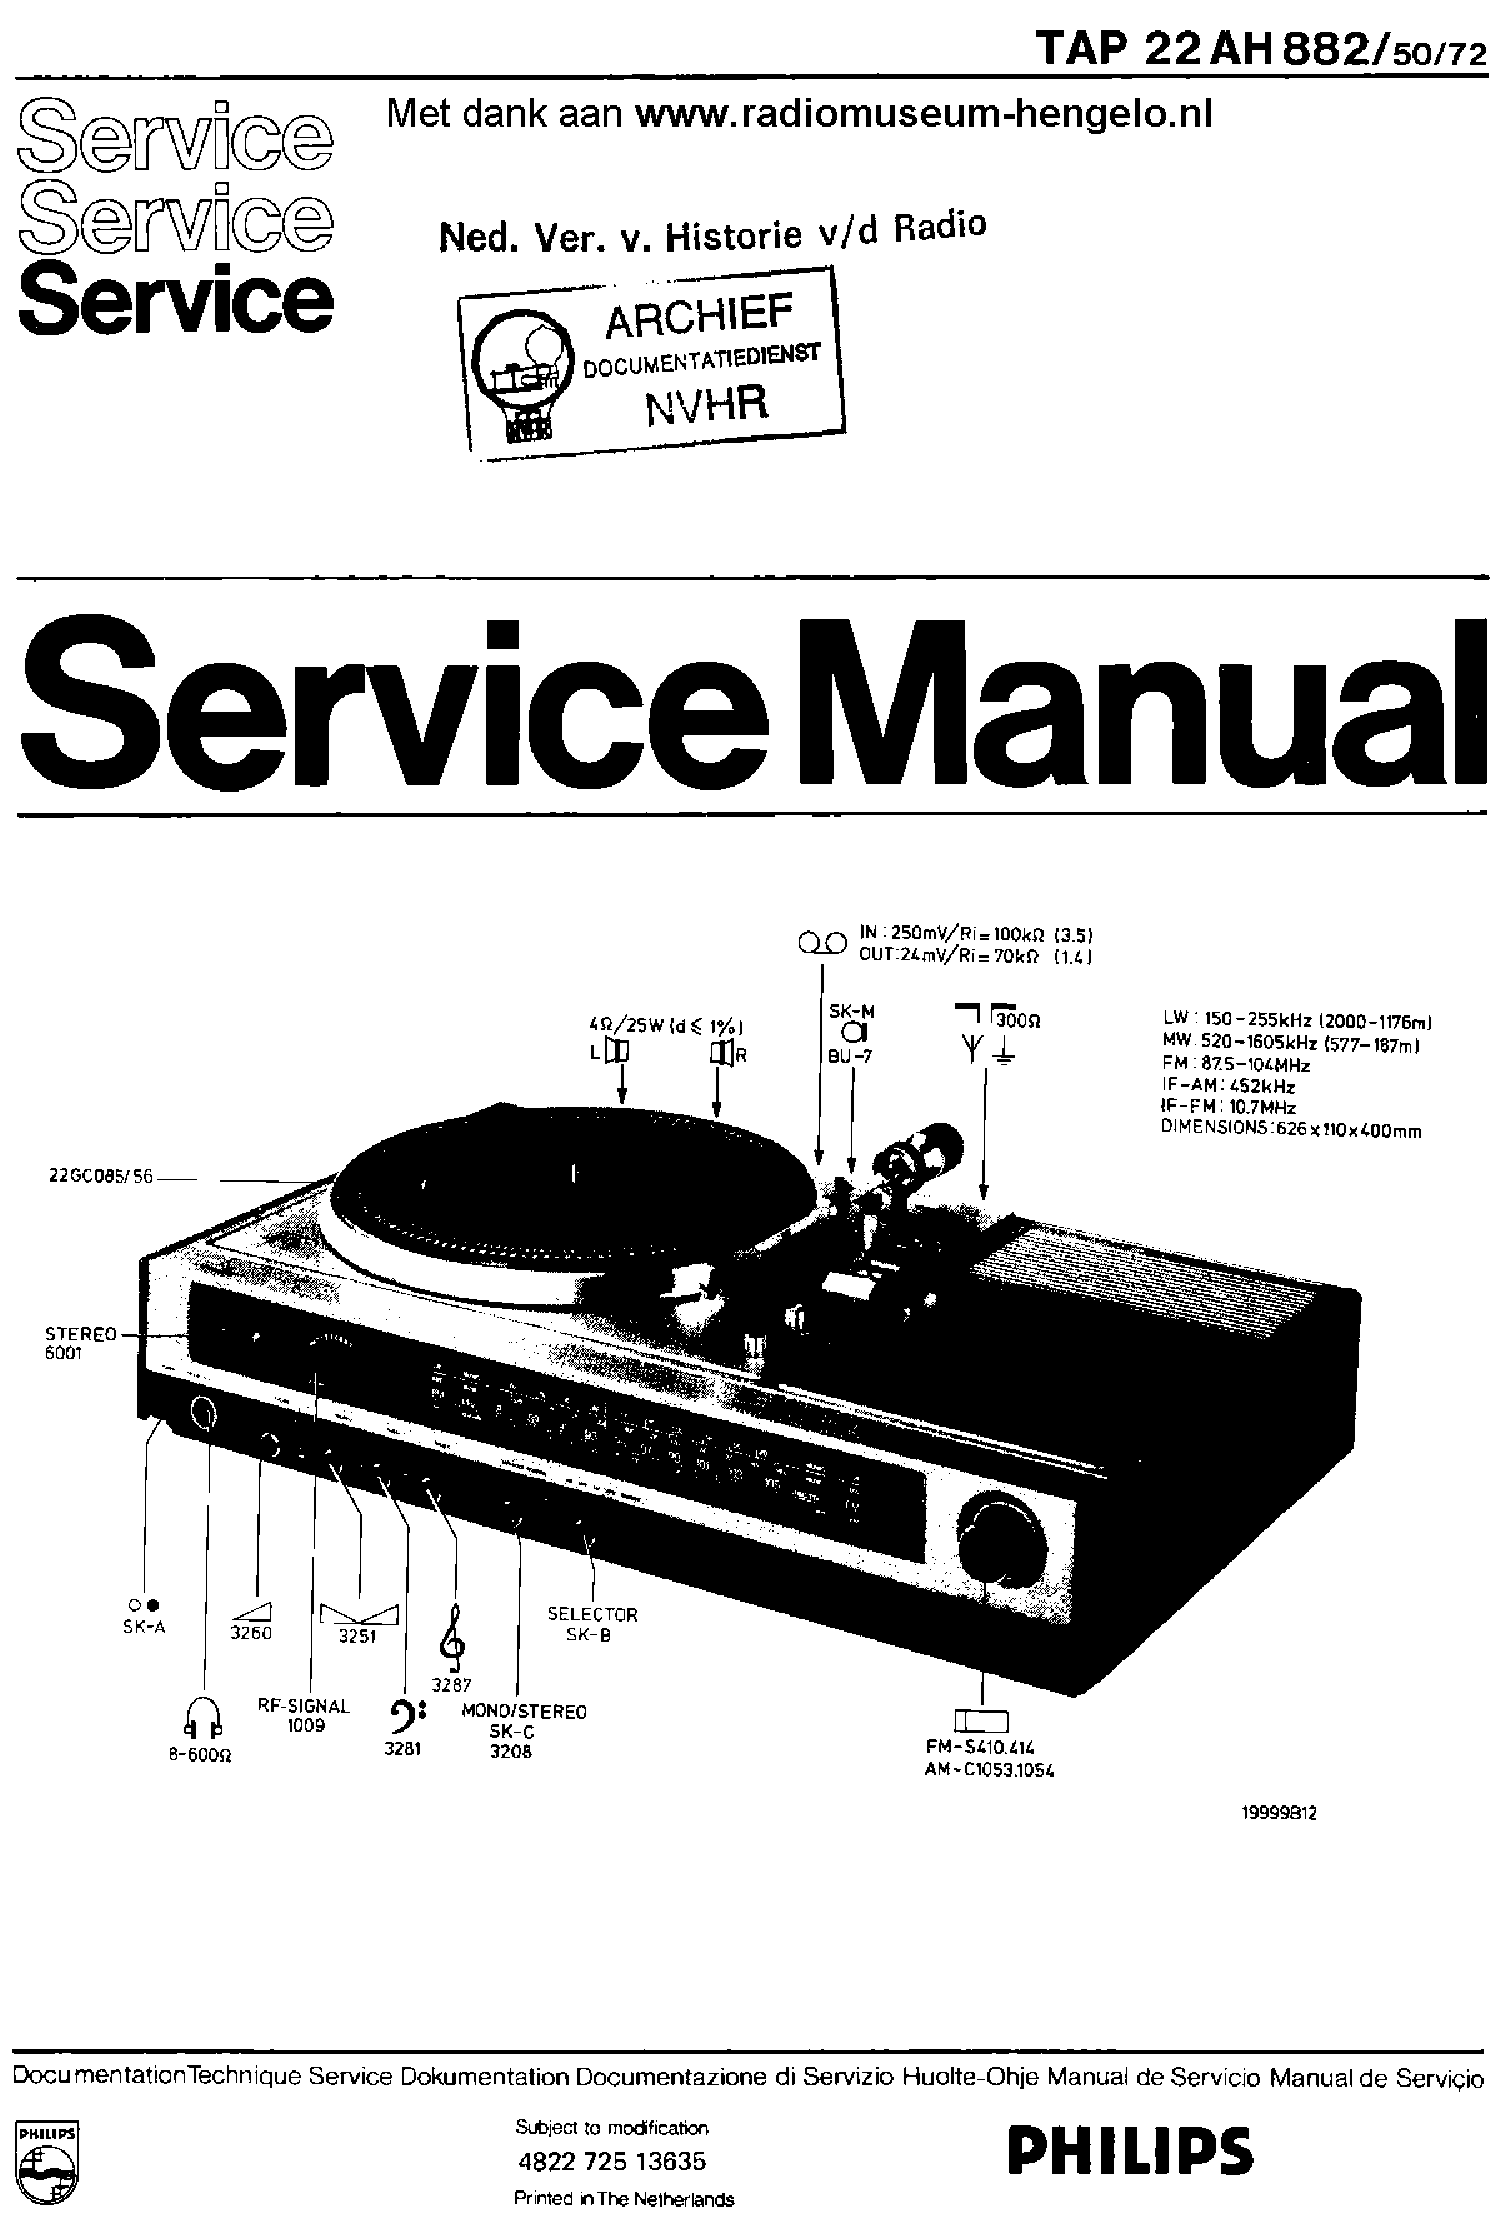 PHILIPS 22AH882 482272513635 service manual (1st page)